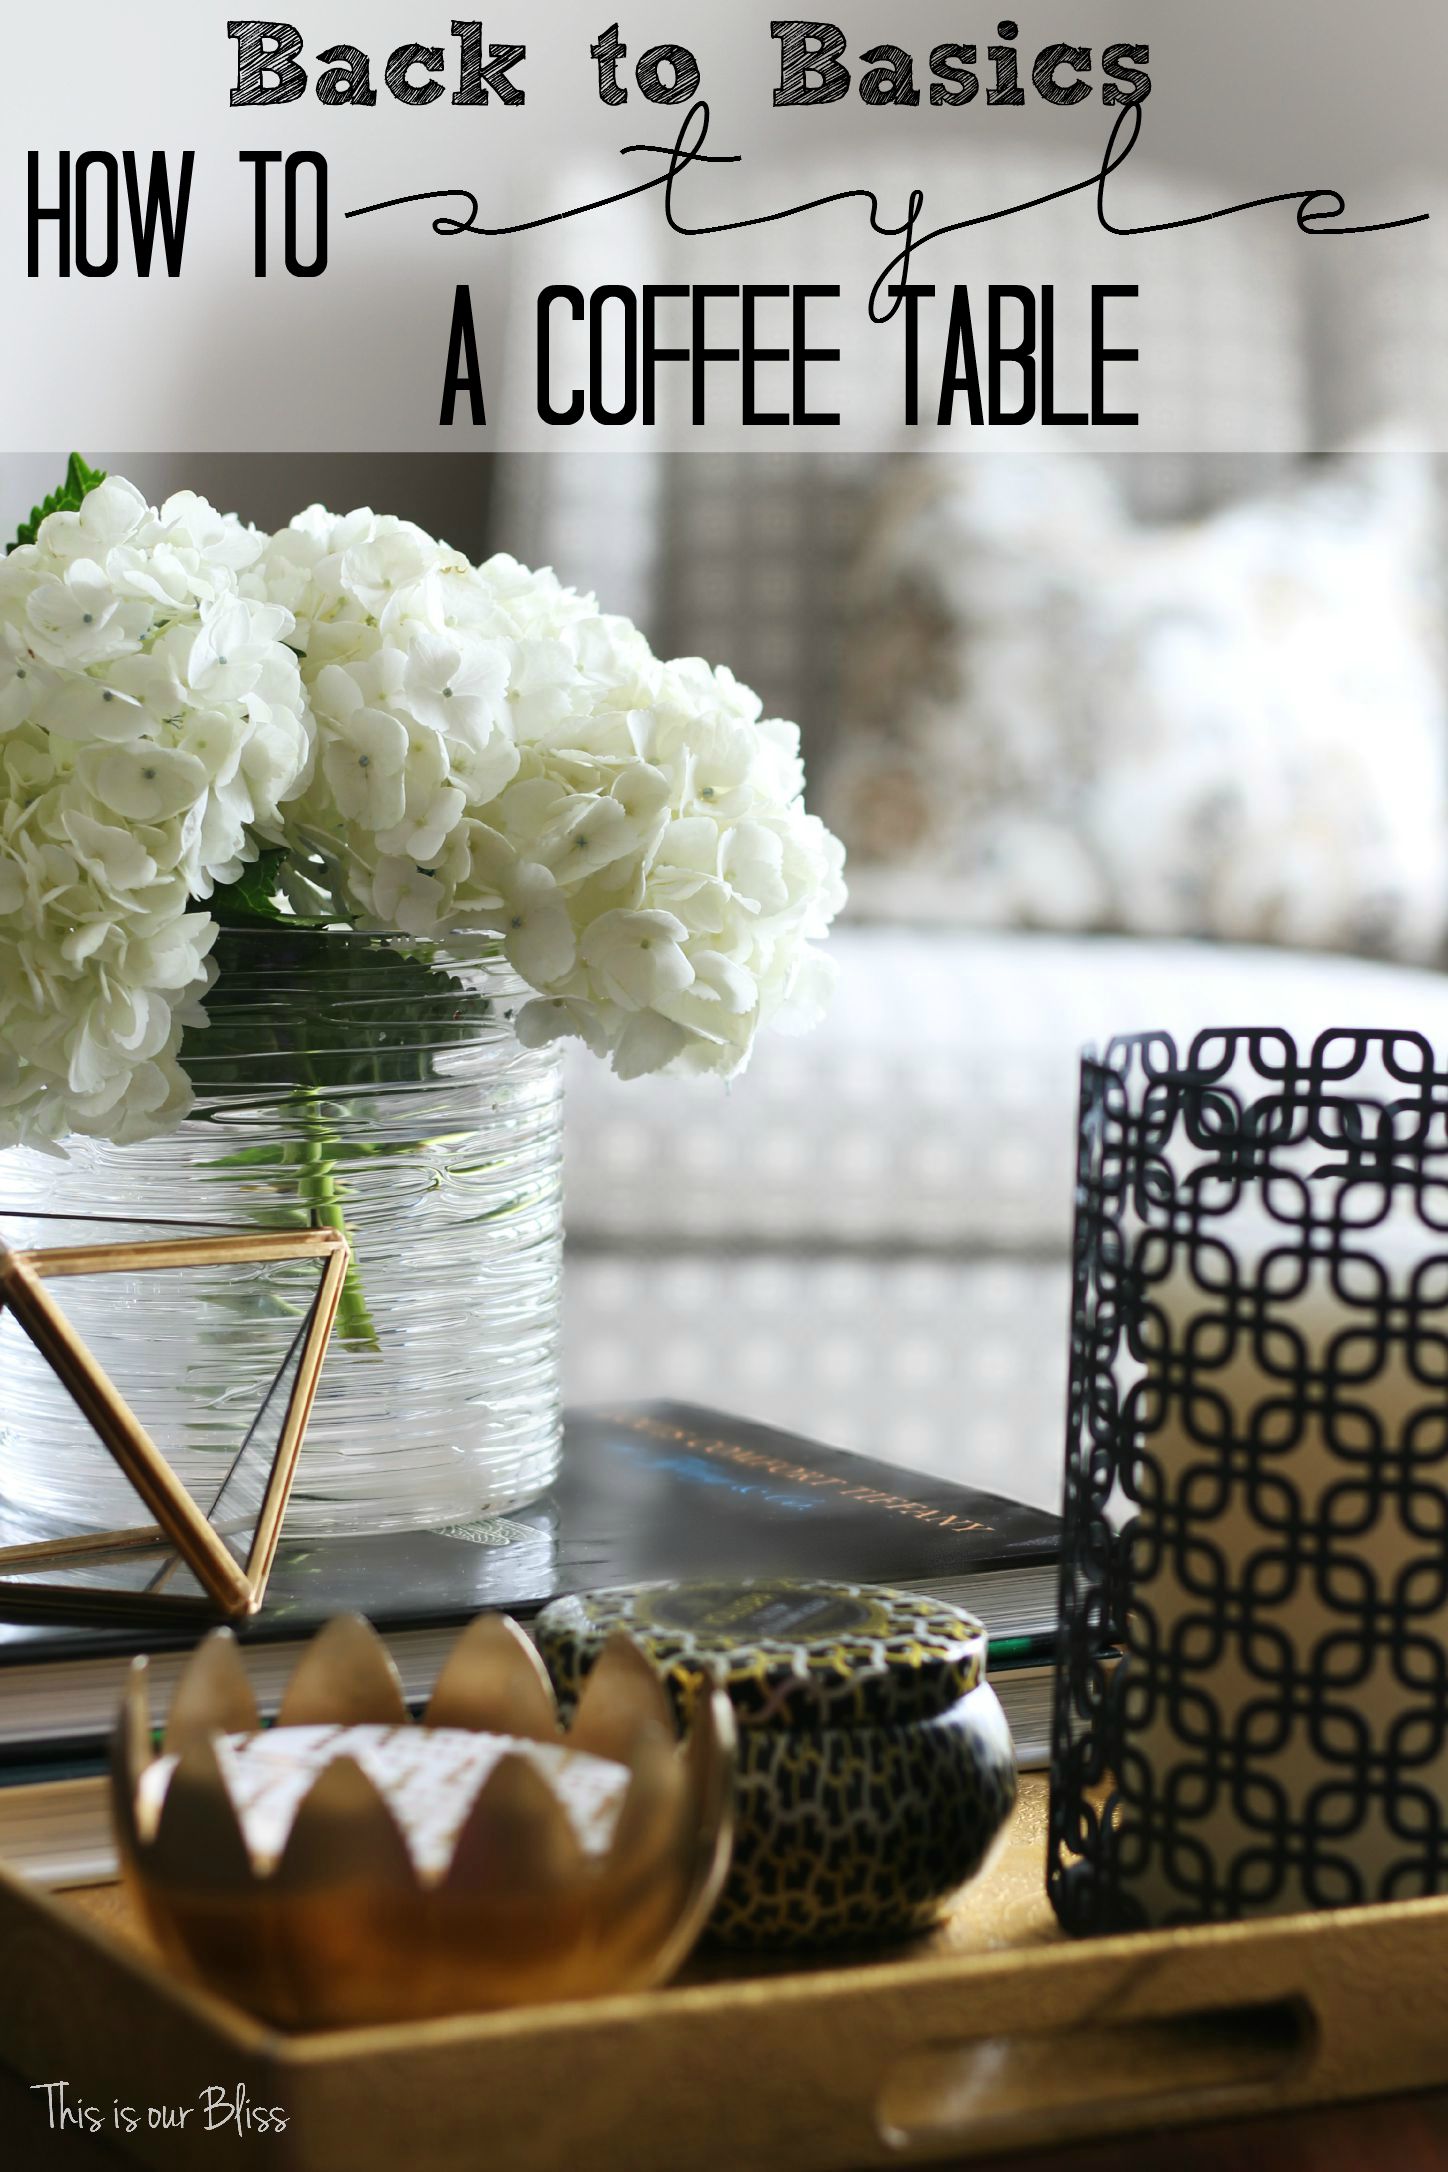 How to style a coffee table - coffee table styling - elements of a well-styled coffee table - Back to Basics 3 - This is our Bliss